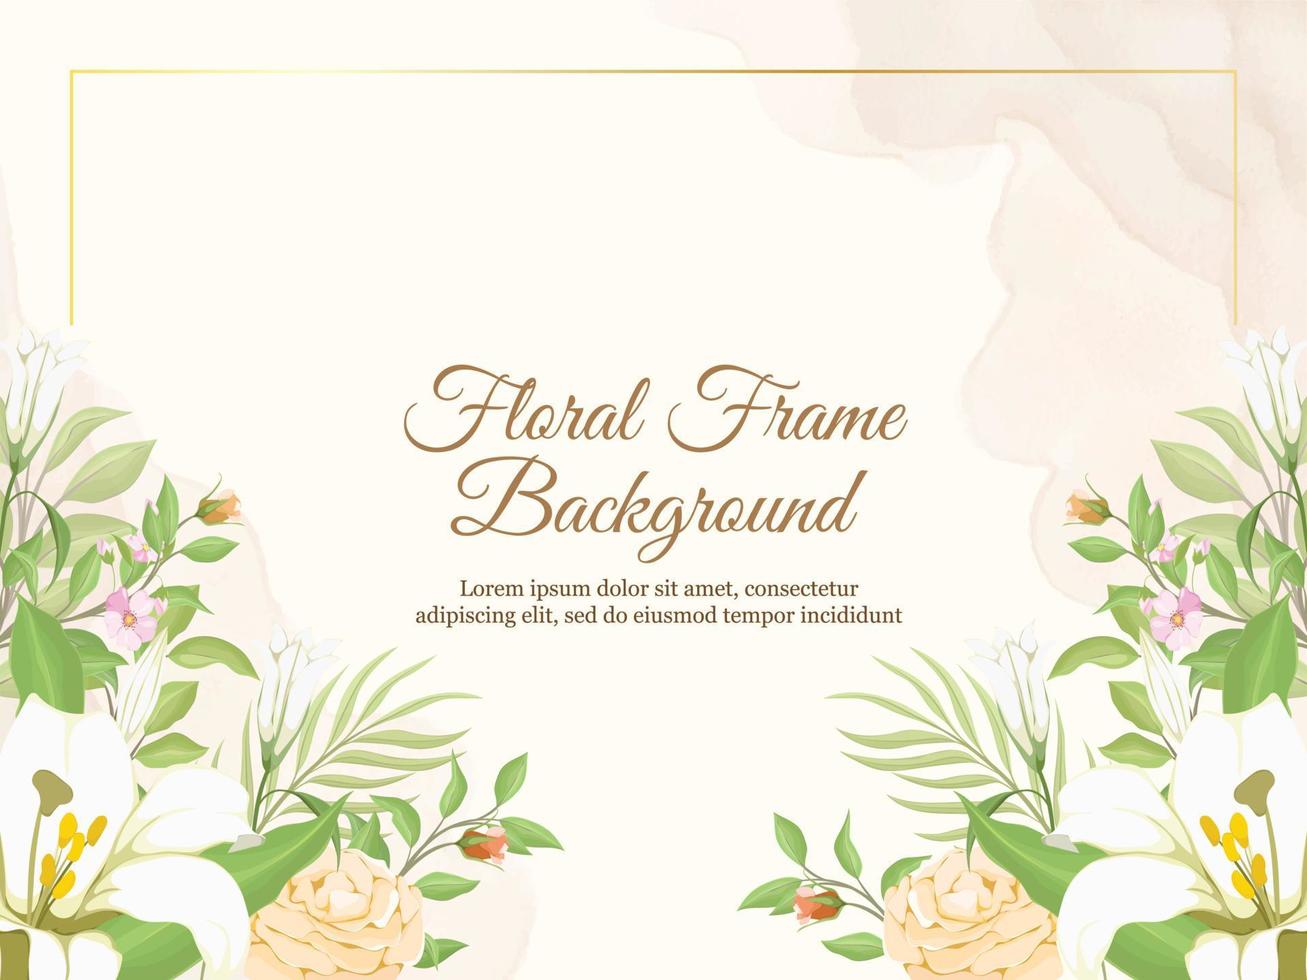 Beautifull Wedding Banner Background with Lily Flowers vector